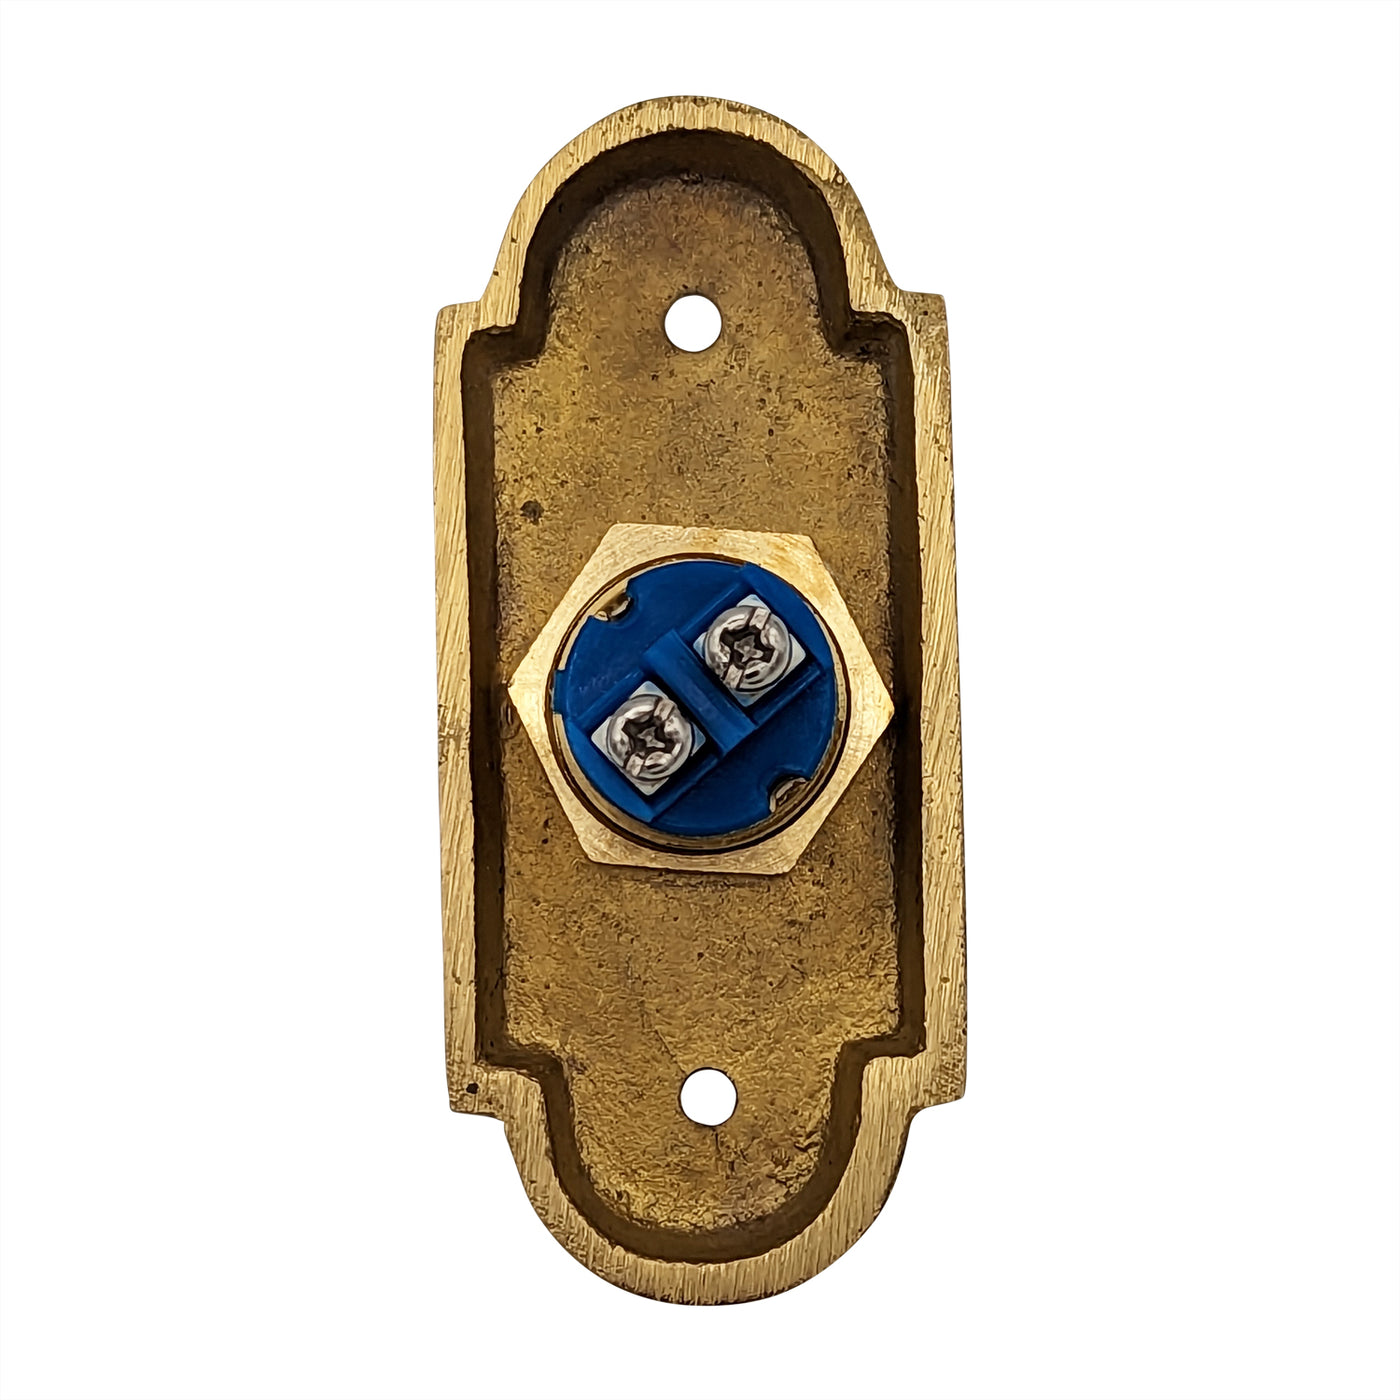 3 Inch Solid Brass Arched Porcelain "Press" Doorbell Button (Several Finishes Available)